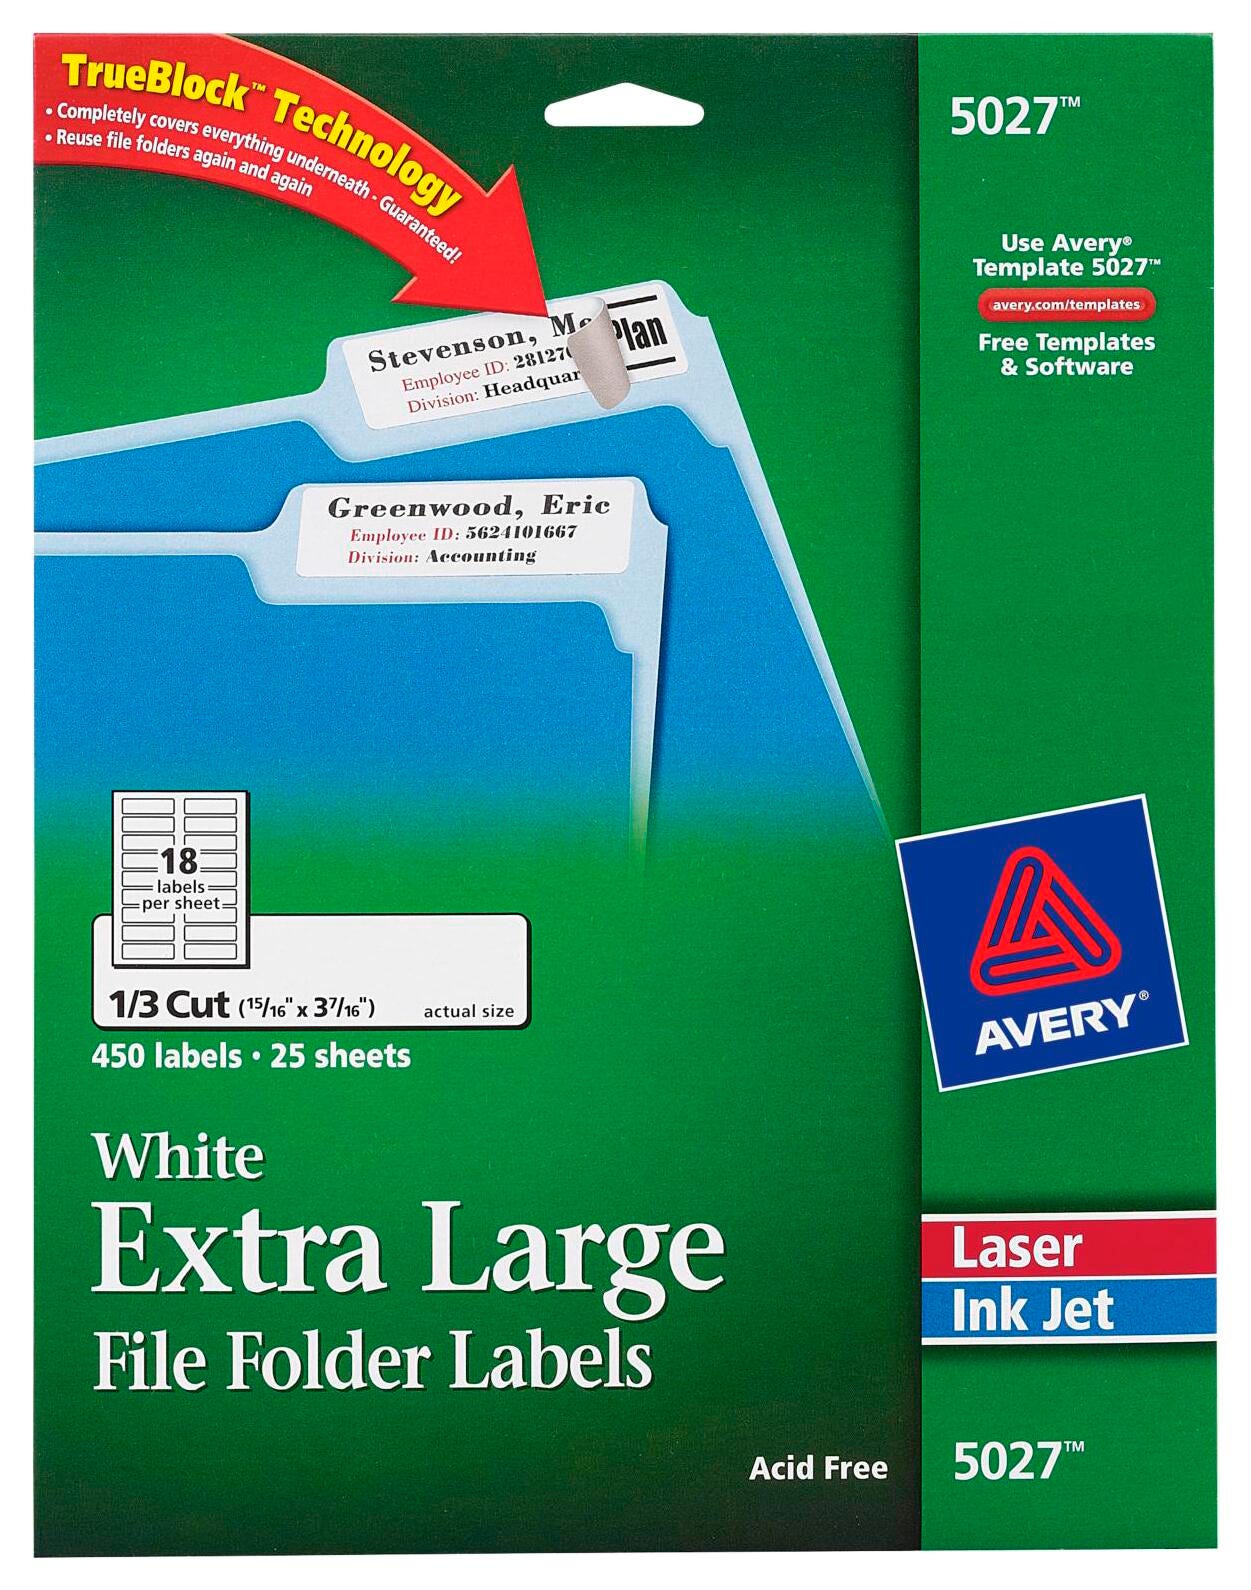 Avery Printable File Folder Labels, 15/16 x 3-7/16 Inches, White, Pack of 450